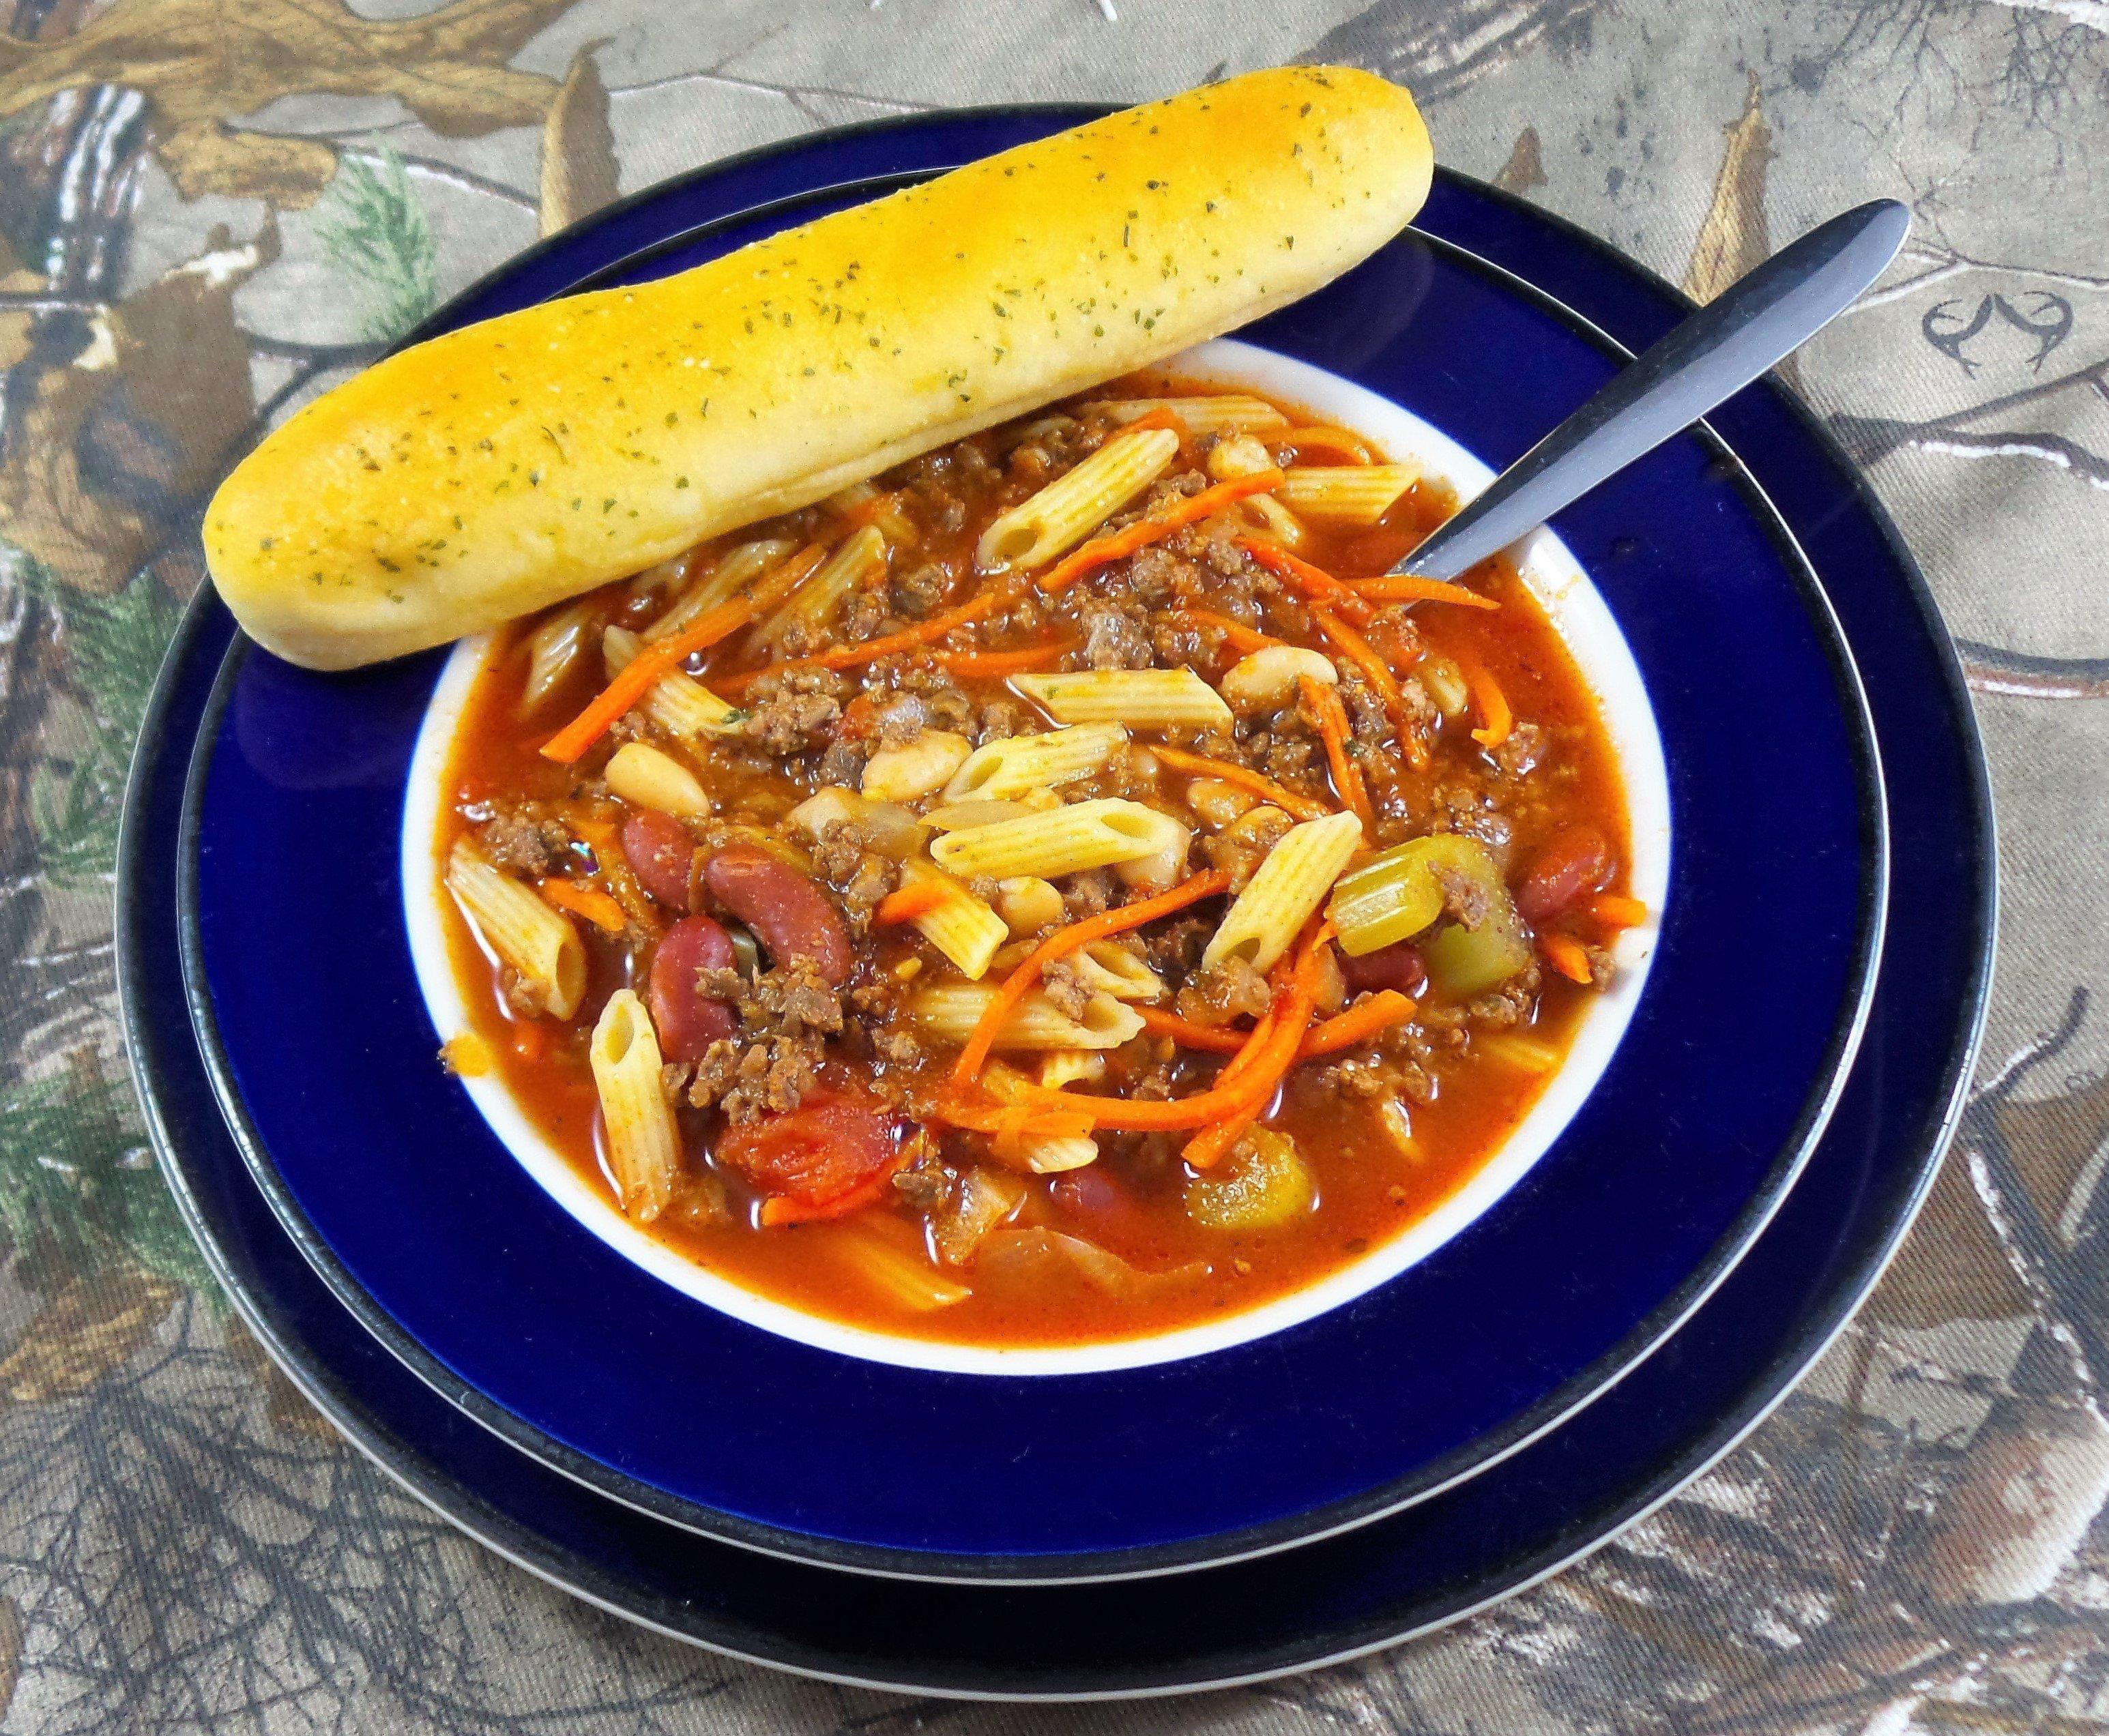 The addition of ground venison to this classic vegetable and bean soup turns it into a meal.